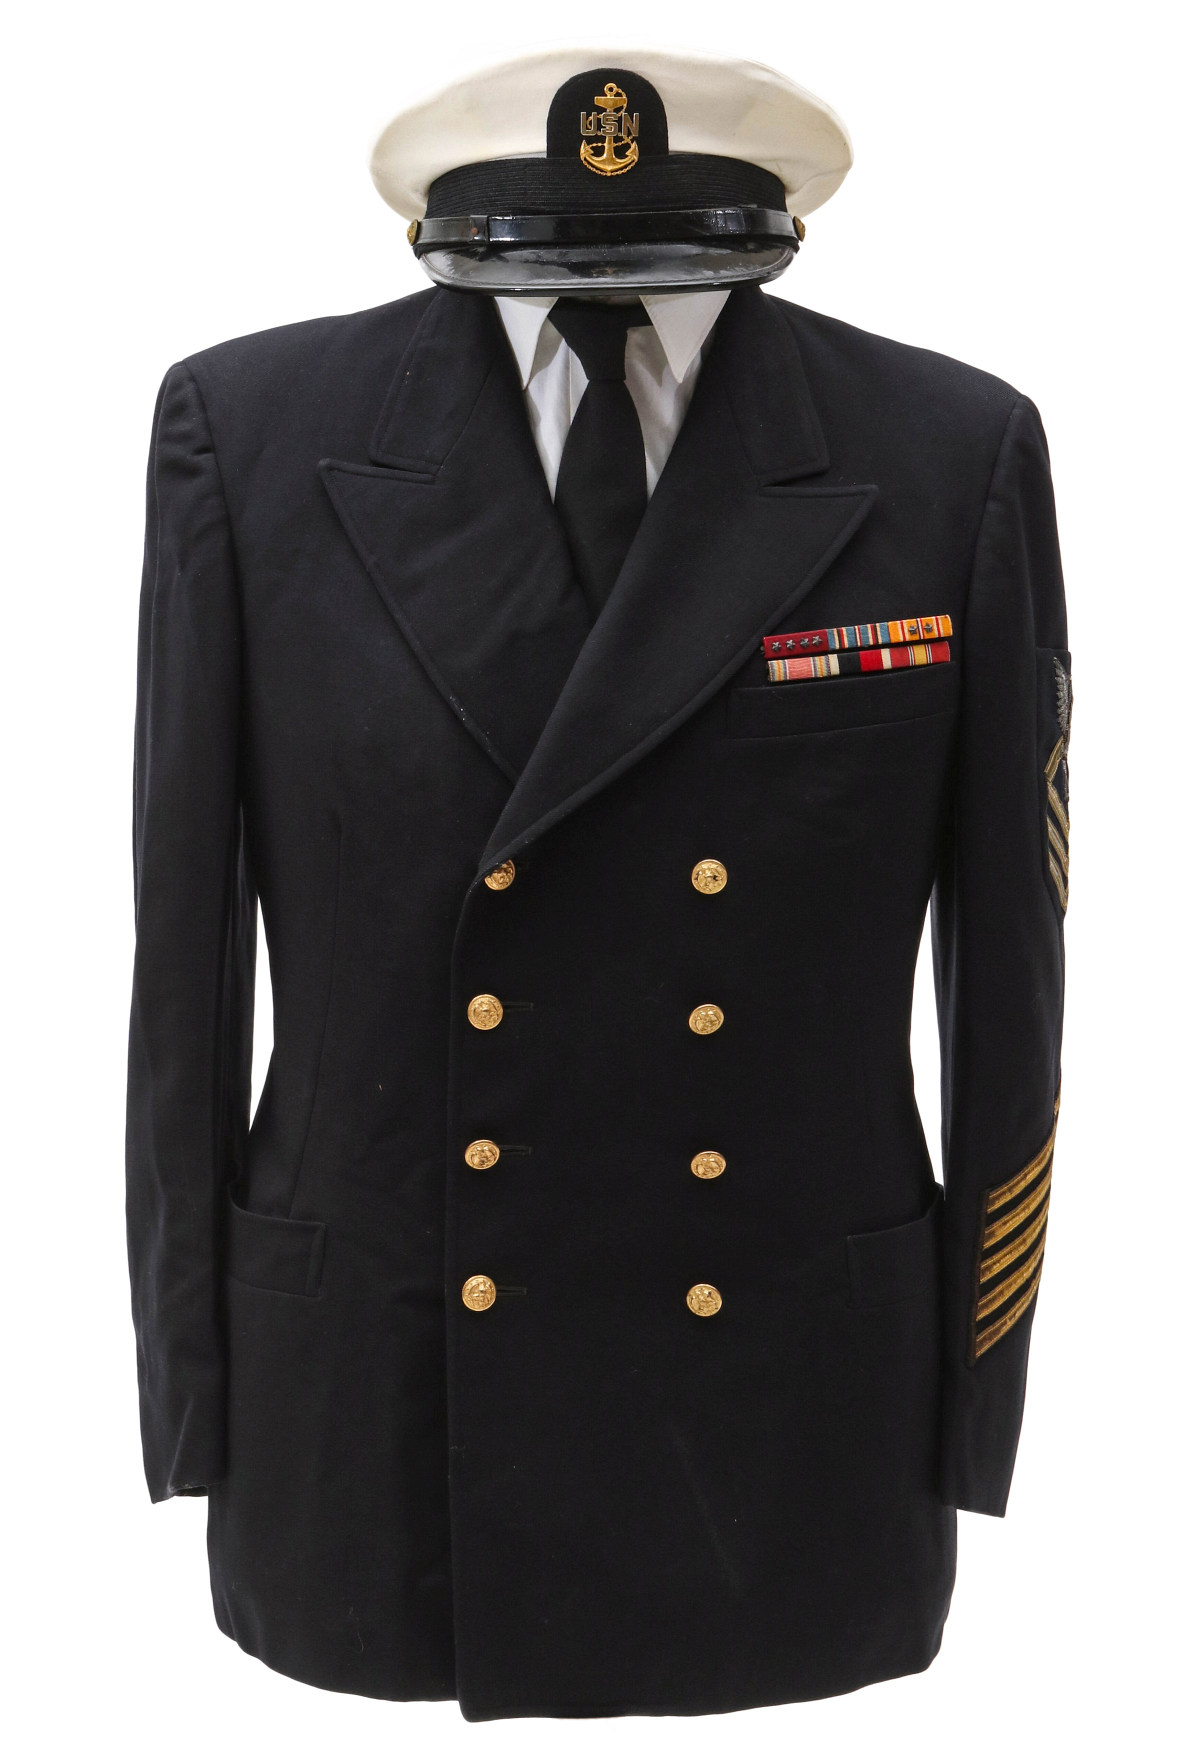 UNIFORM OF CPO LAWRENCE WALBURN, USN BAKER AND COOK